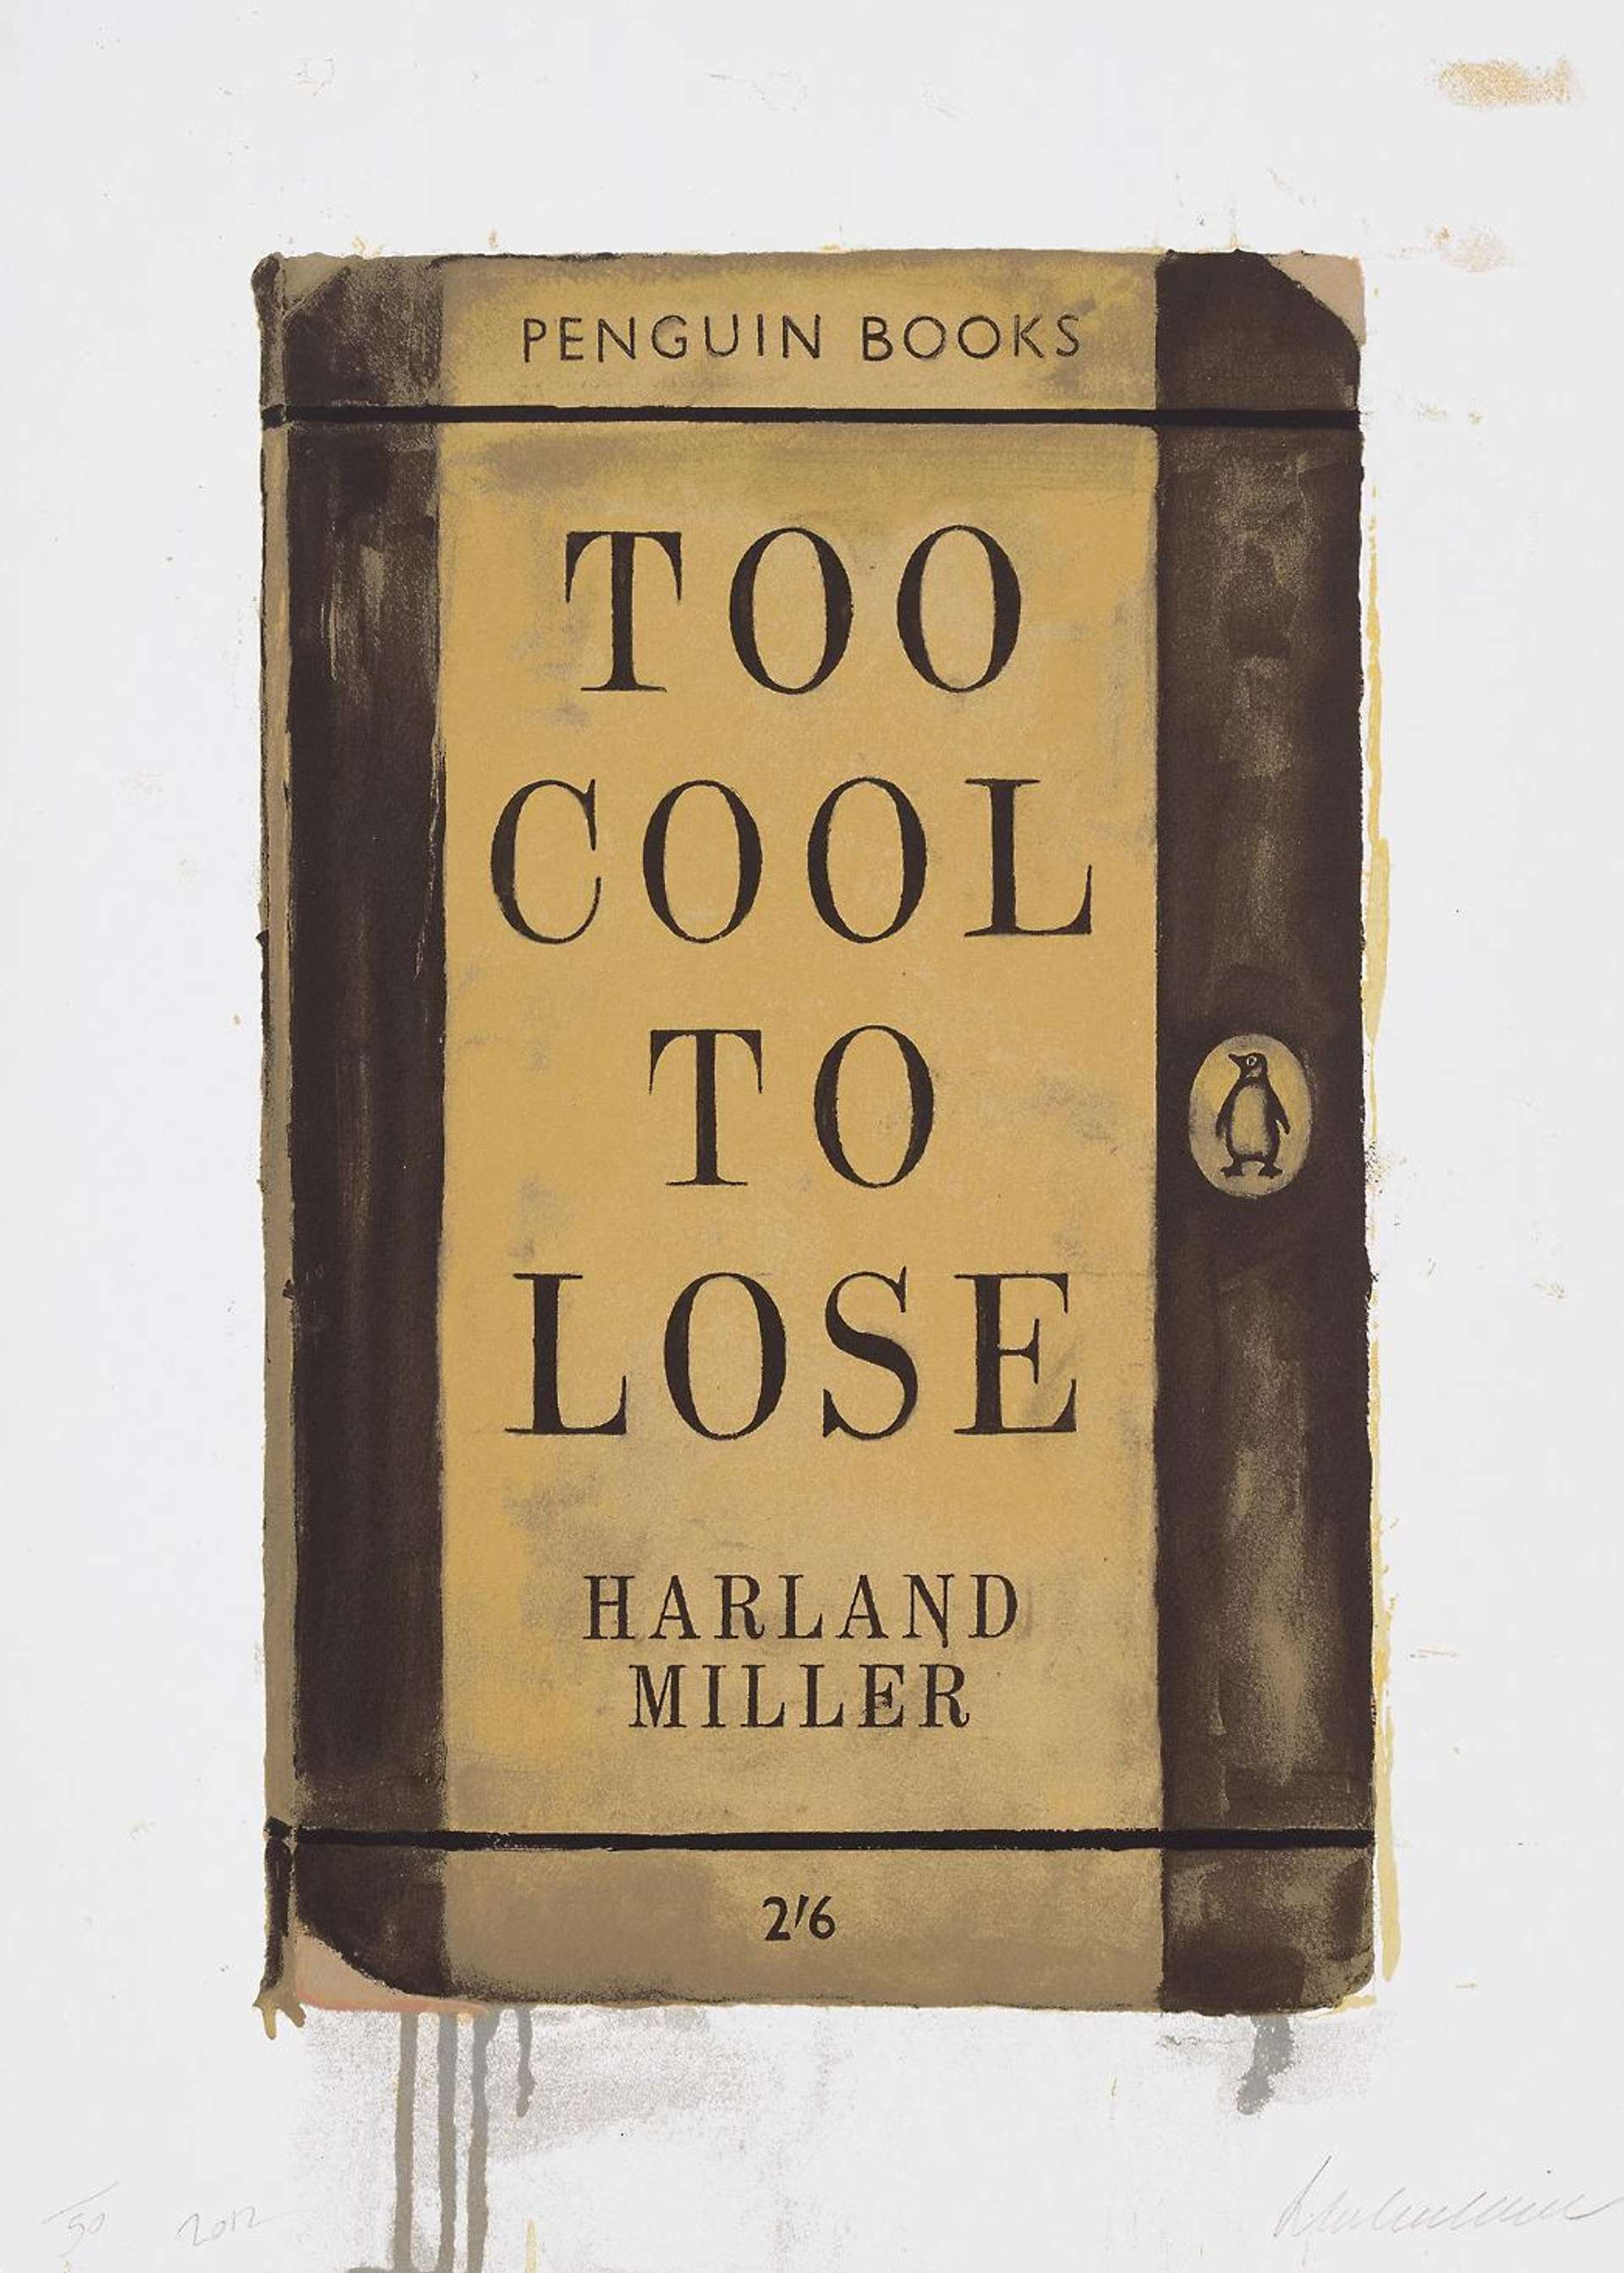 10 Facts About Harland Miller's Penguin Prints